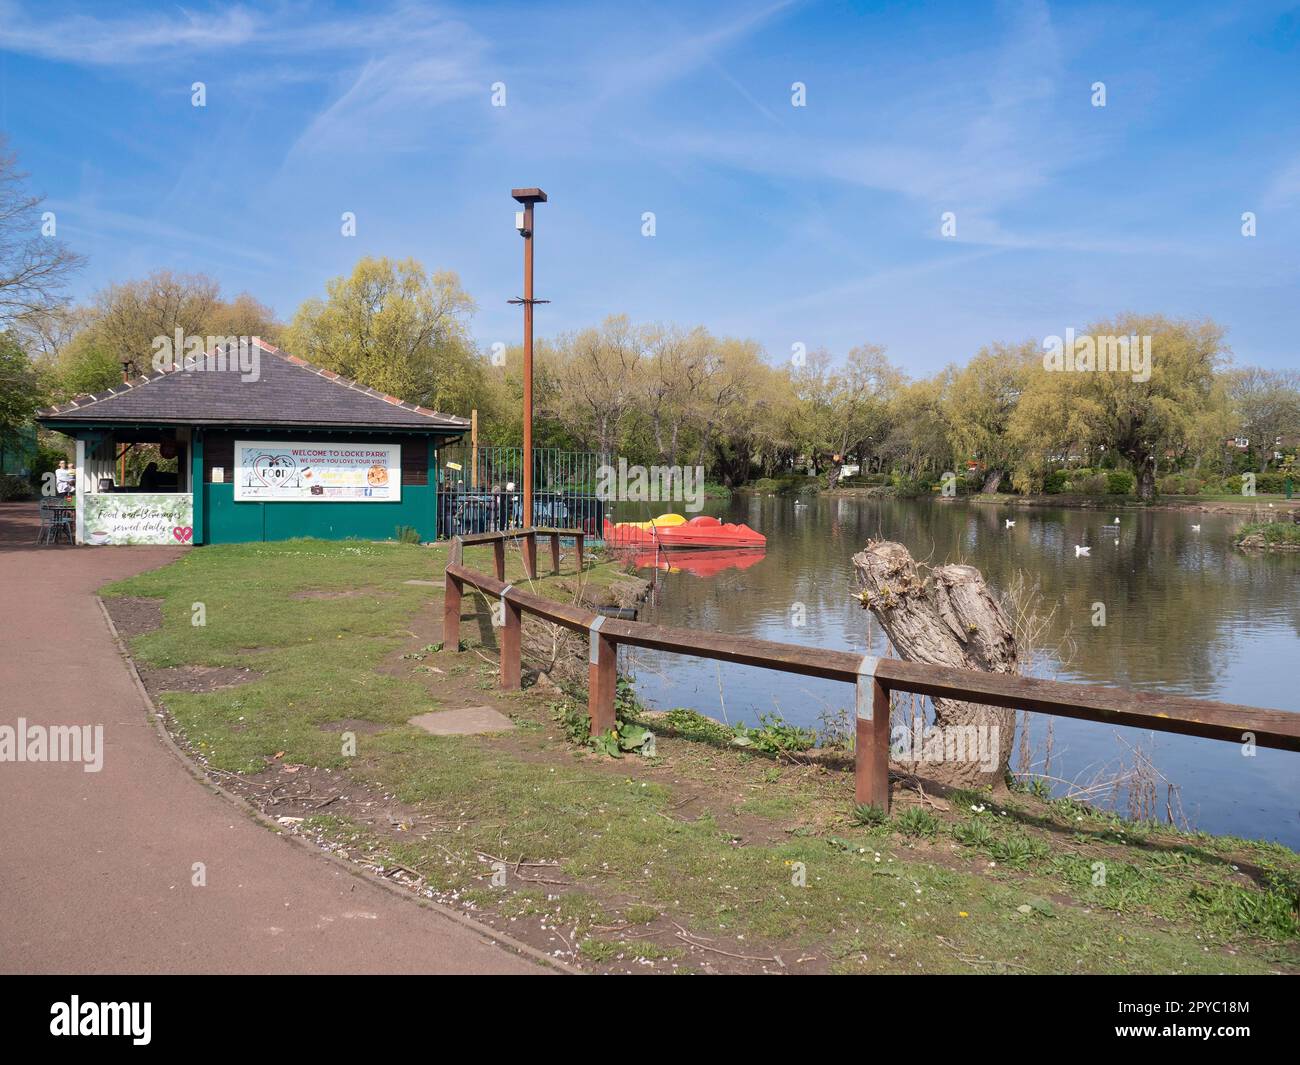 Locke Park Lake Redcar on a sunny spring day showing the café and red and yellow pedalo boats for hire Stock Photo